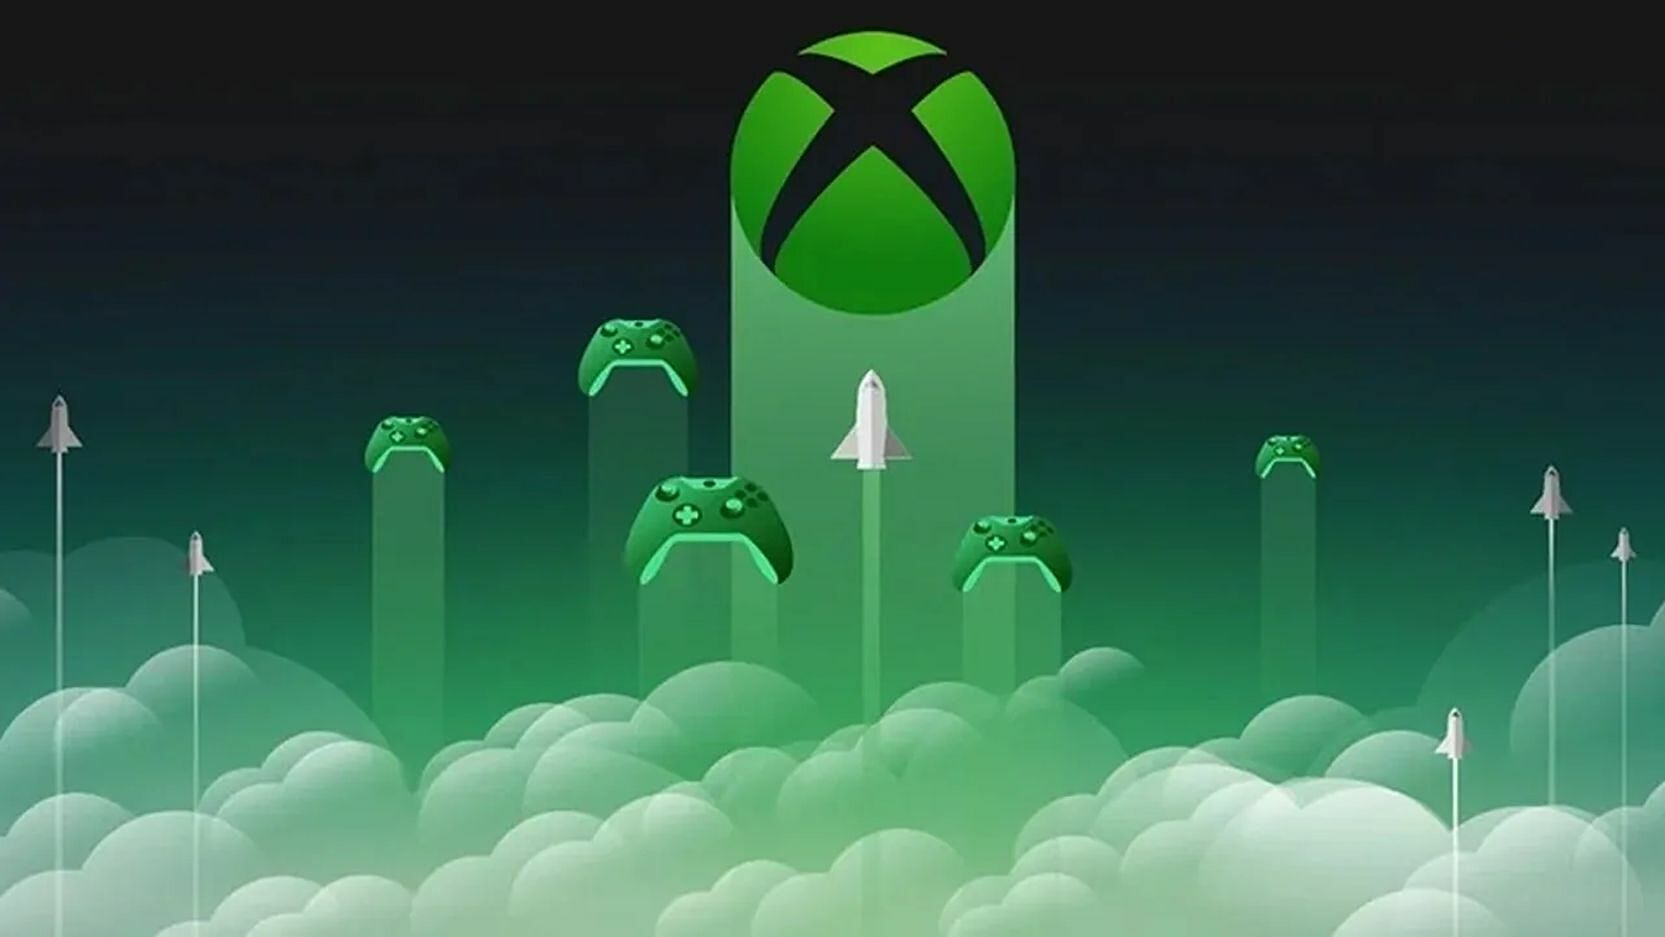 Xbox cloud games can now be launched via Bing and Microsoft Edge